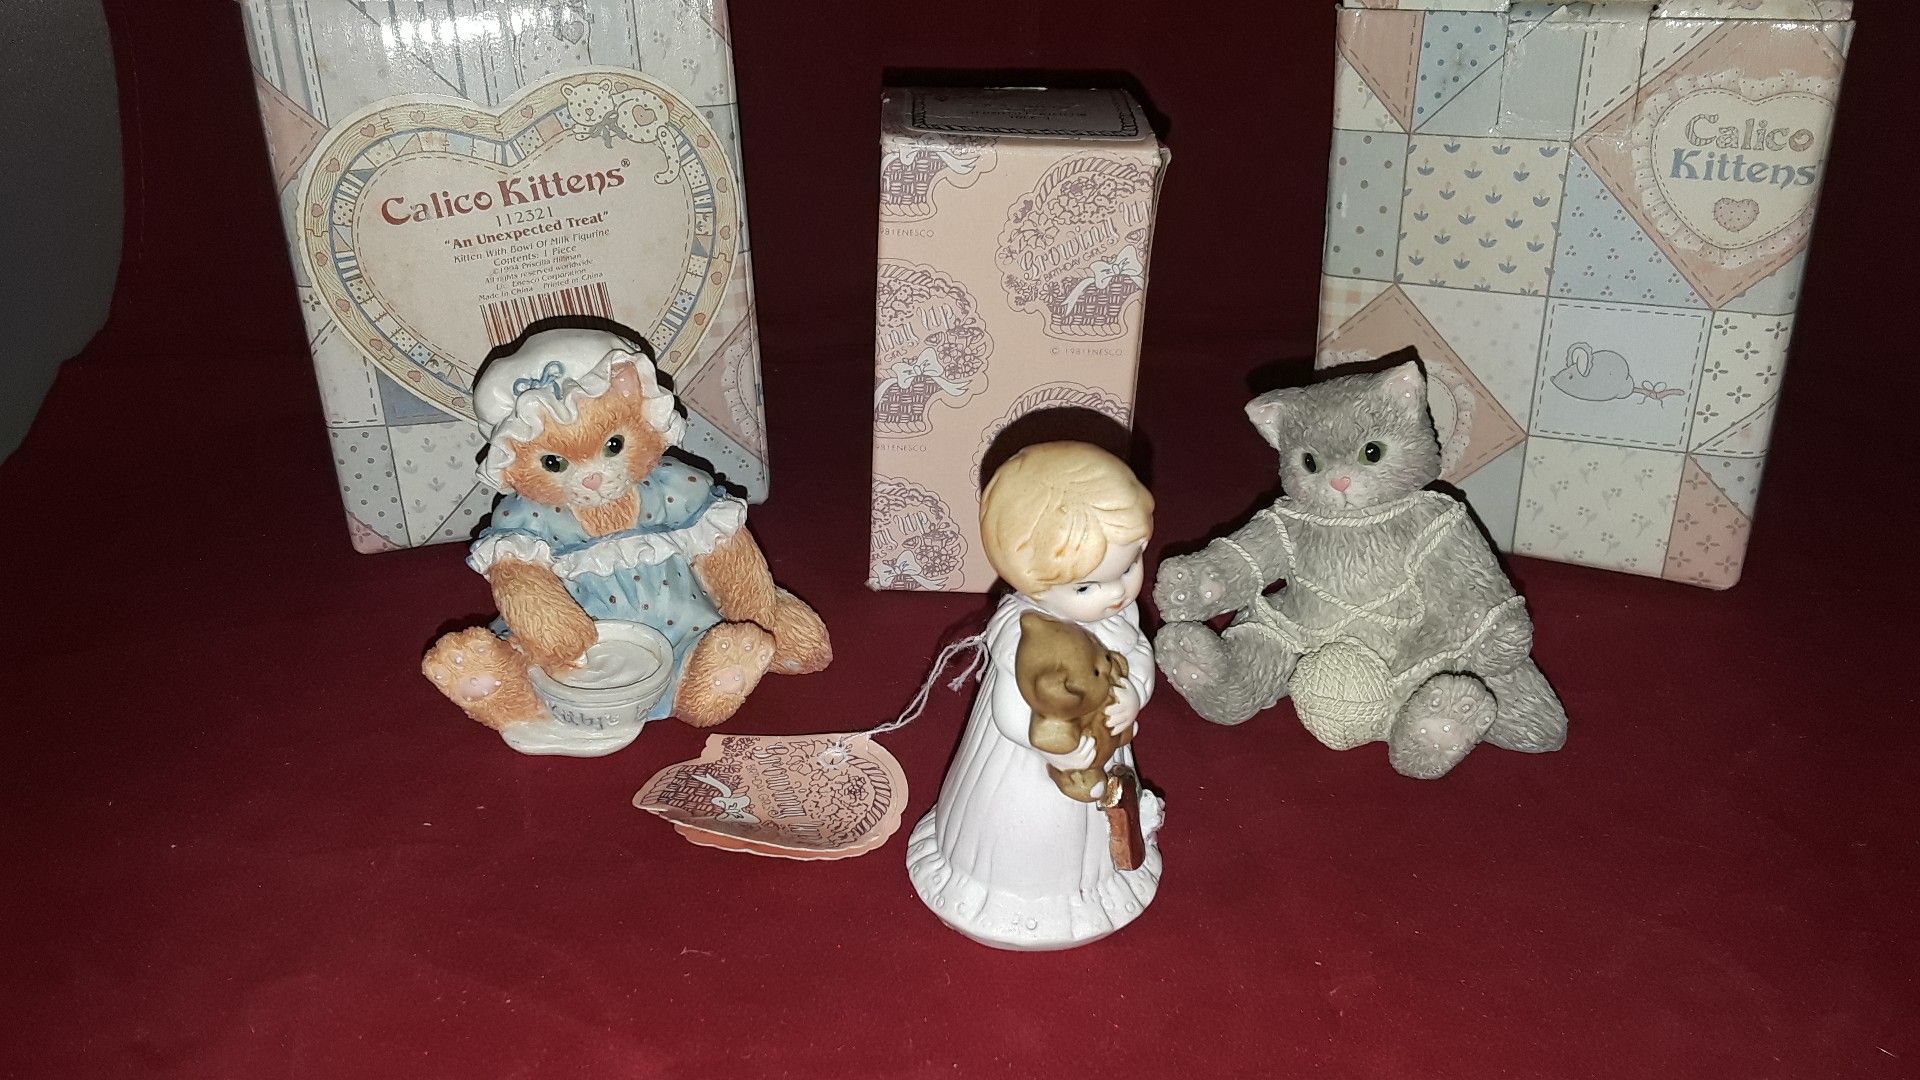 3 ENESCO FIGURINED--2 CALICO KITTENS "AN UNEXPECTED TREAT" & "A PLAYFUL AFTERNOON PLUS "GROWING UP"